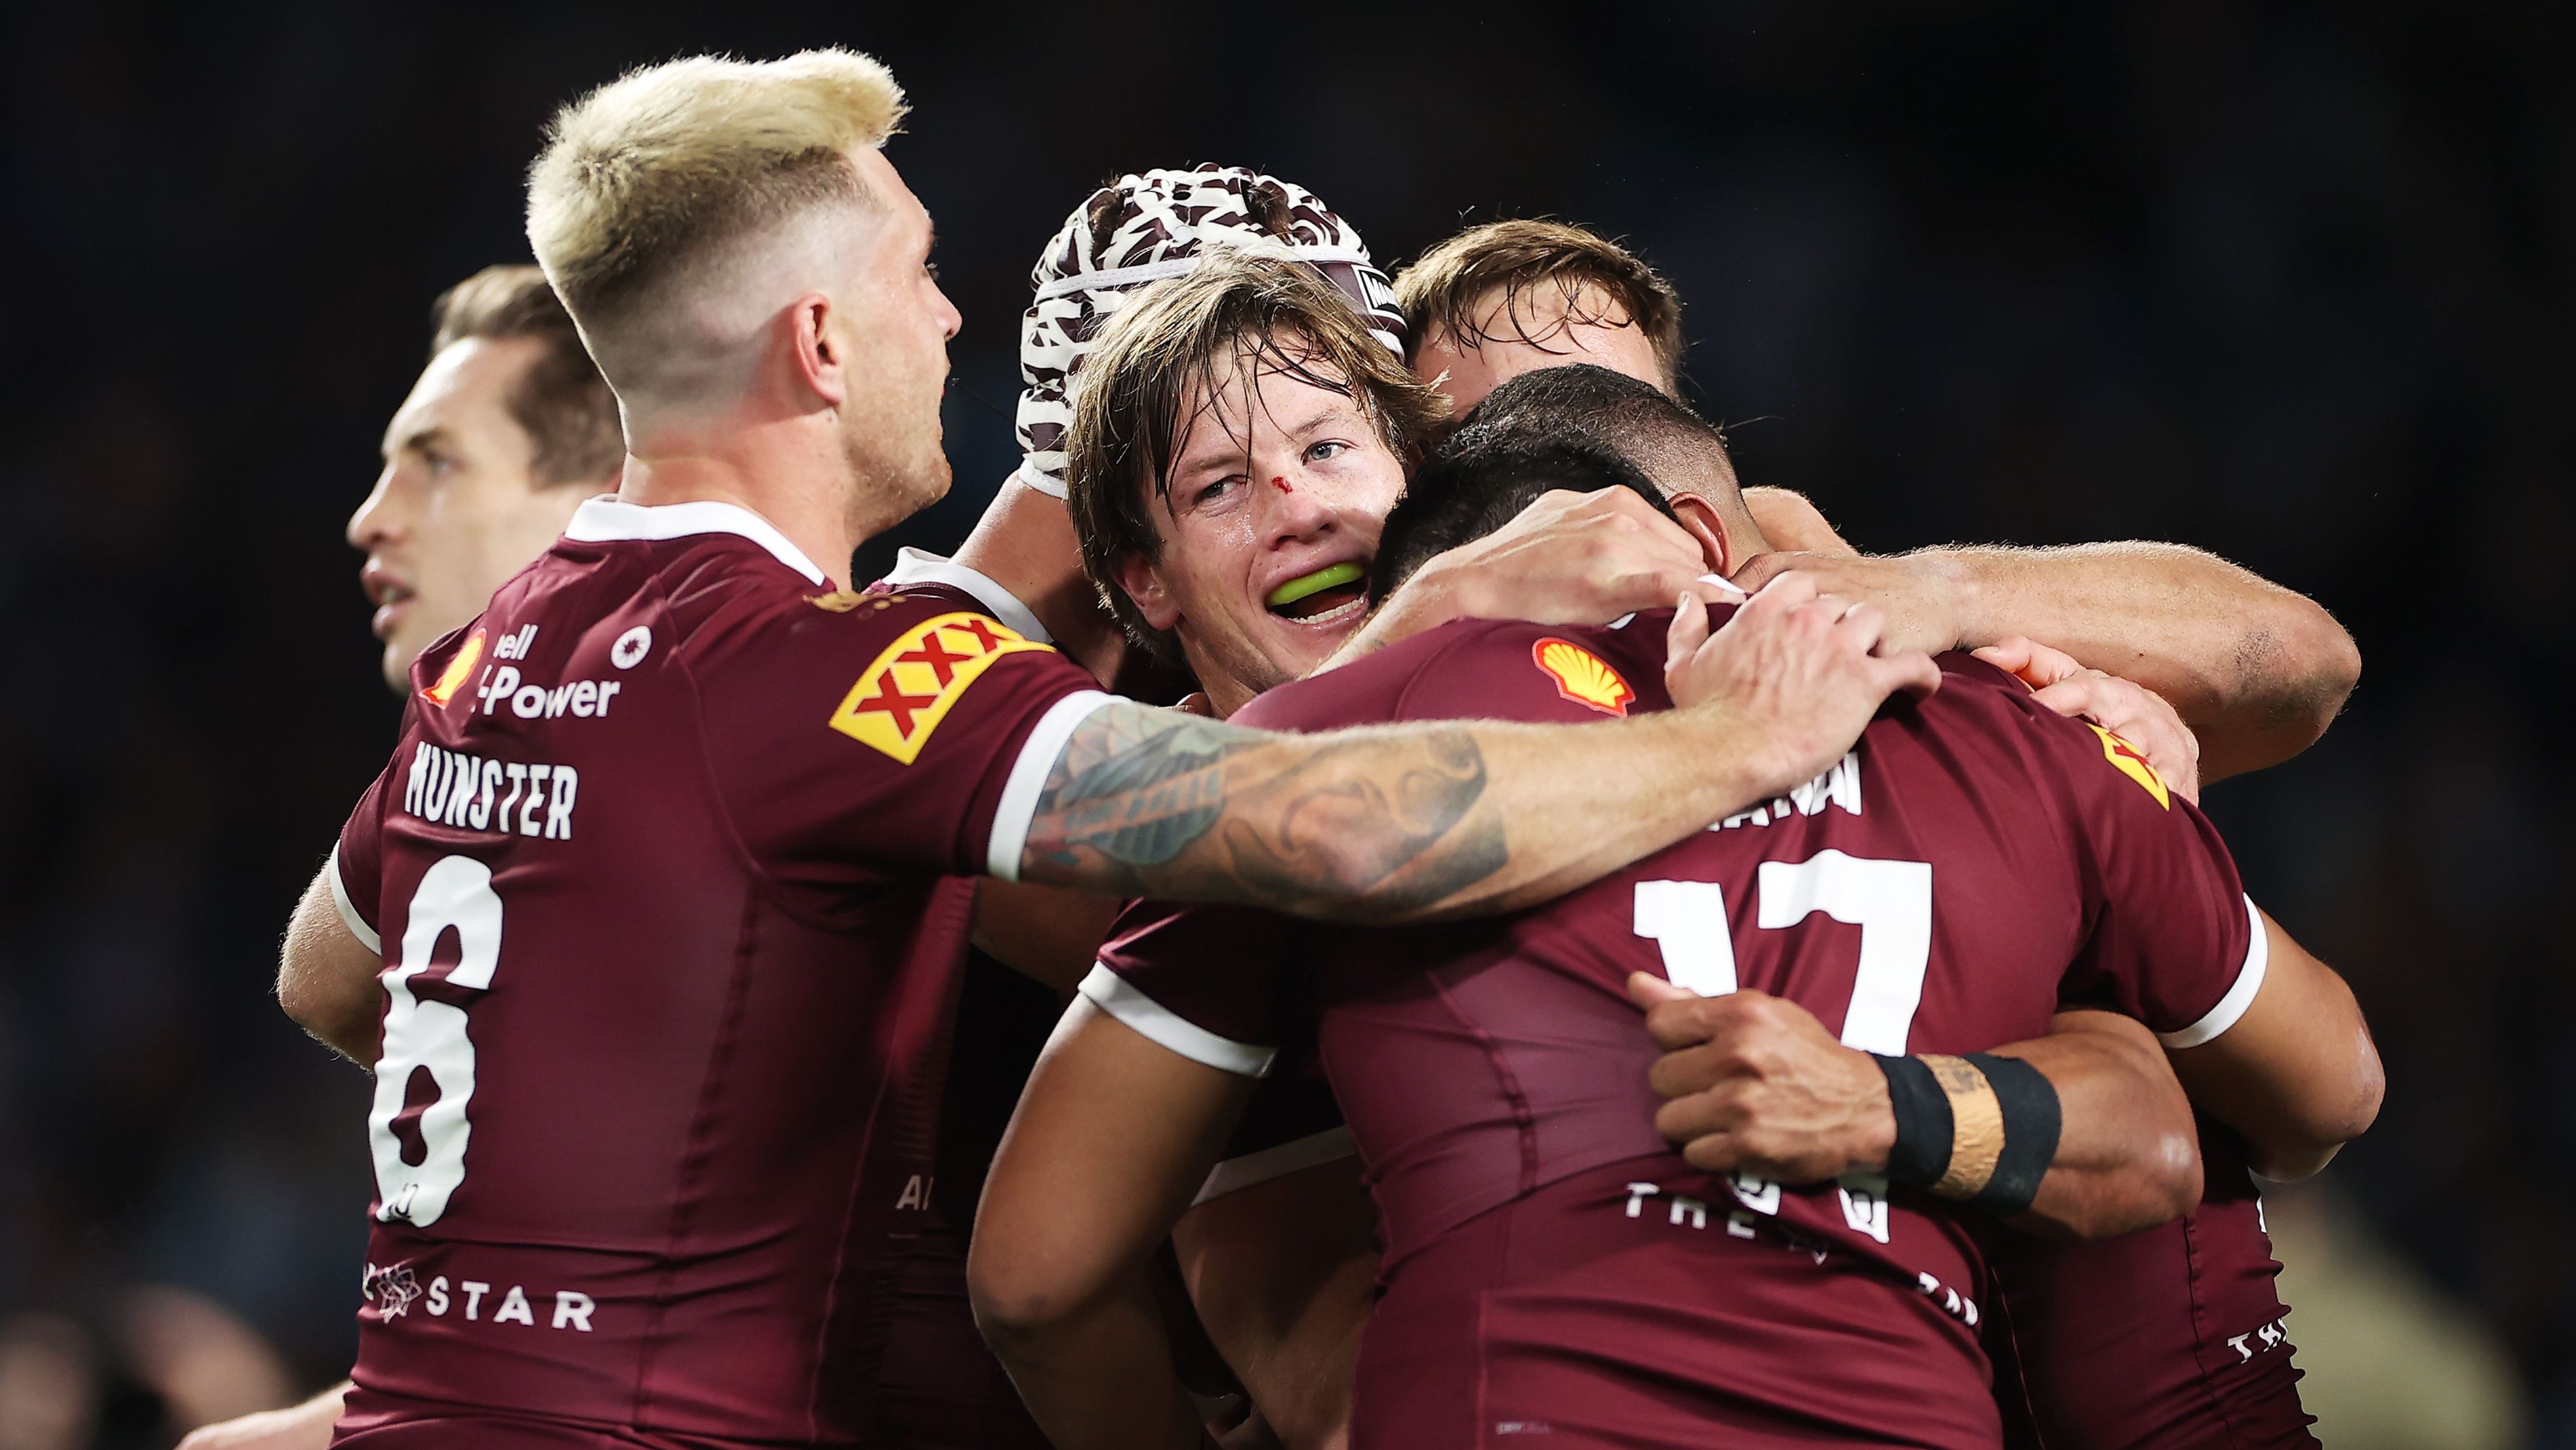 Dane Gagai of the Maroons celebrates with teammates after scoring a try.